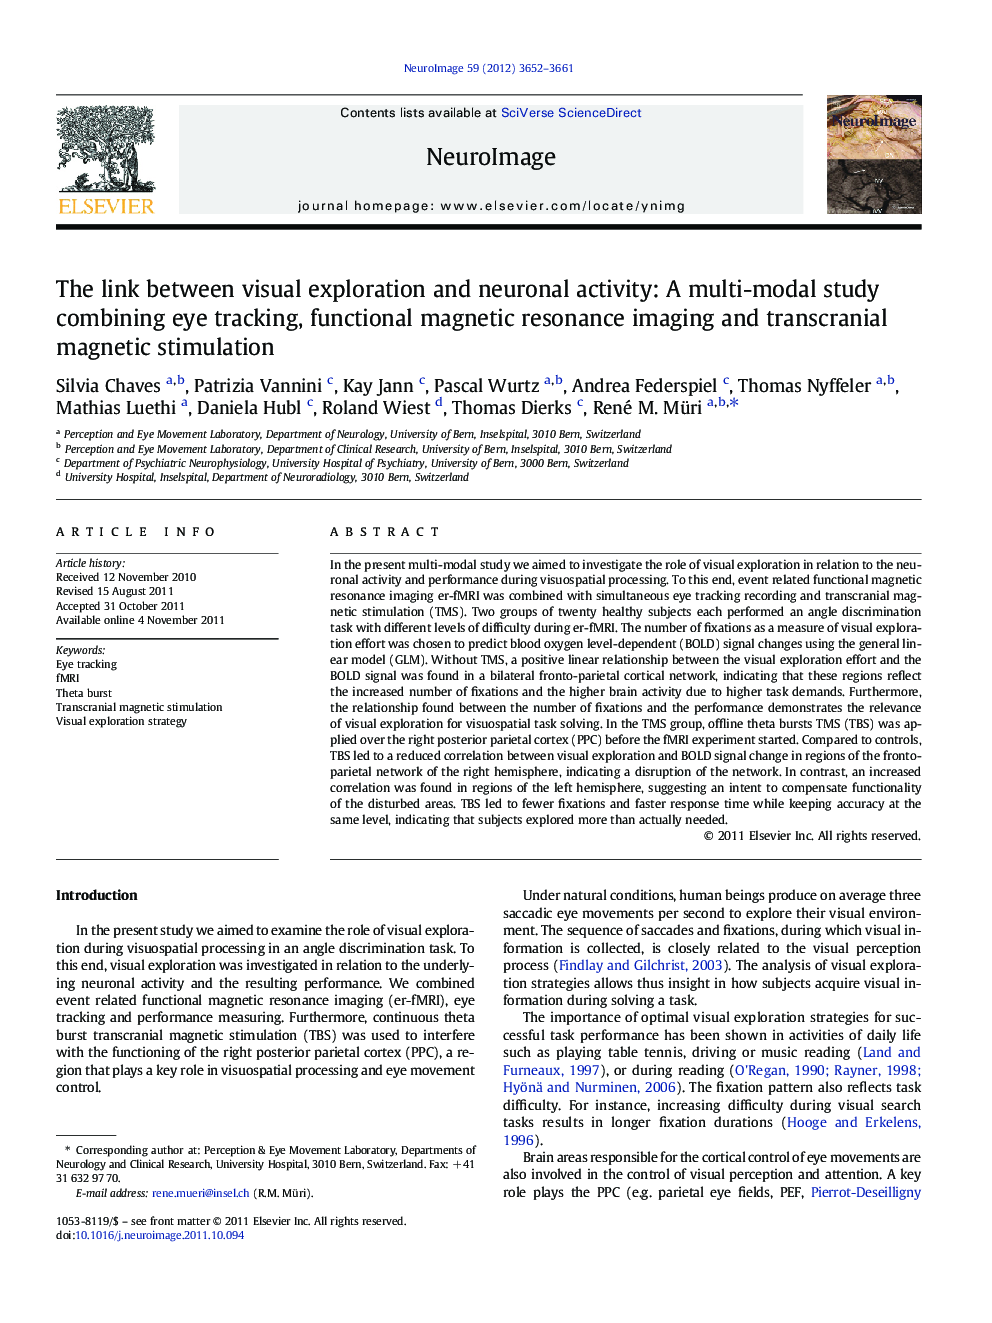 The link between visual exploration and neuronal activity: A multi-modal study combining eye tracking, functional magnetic resonance imaging and transcranial magnetic stimulation